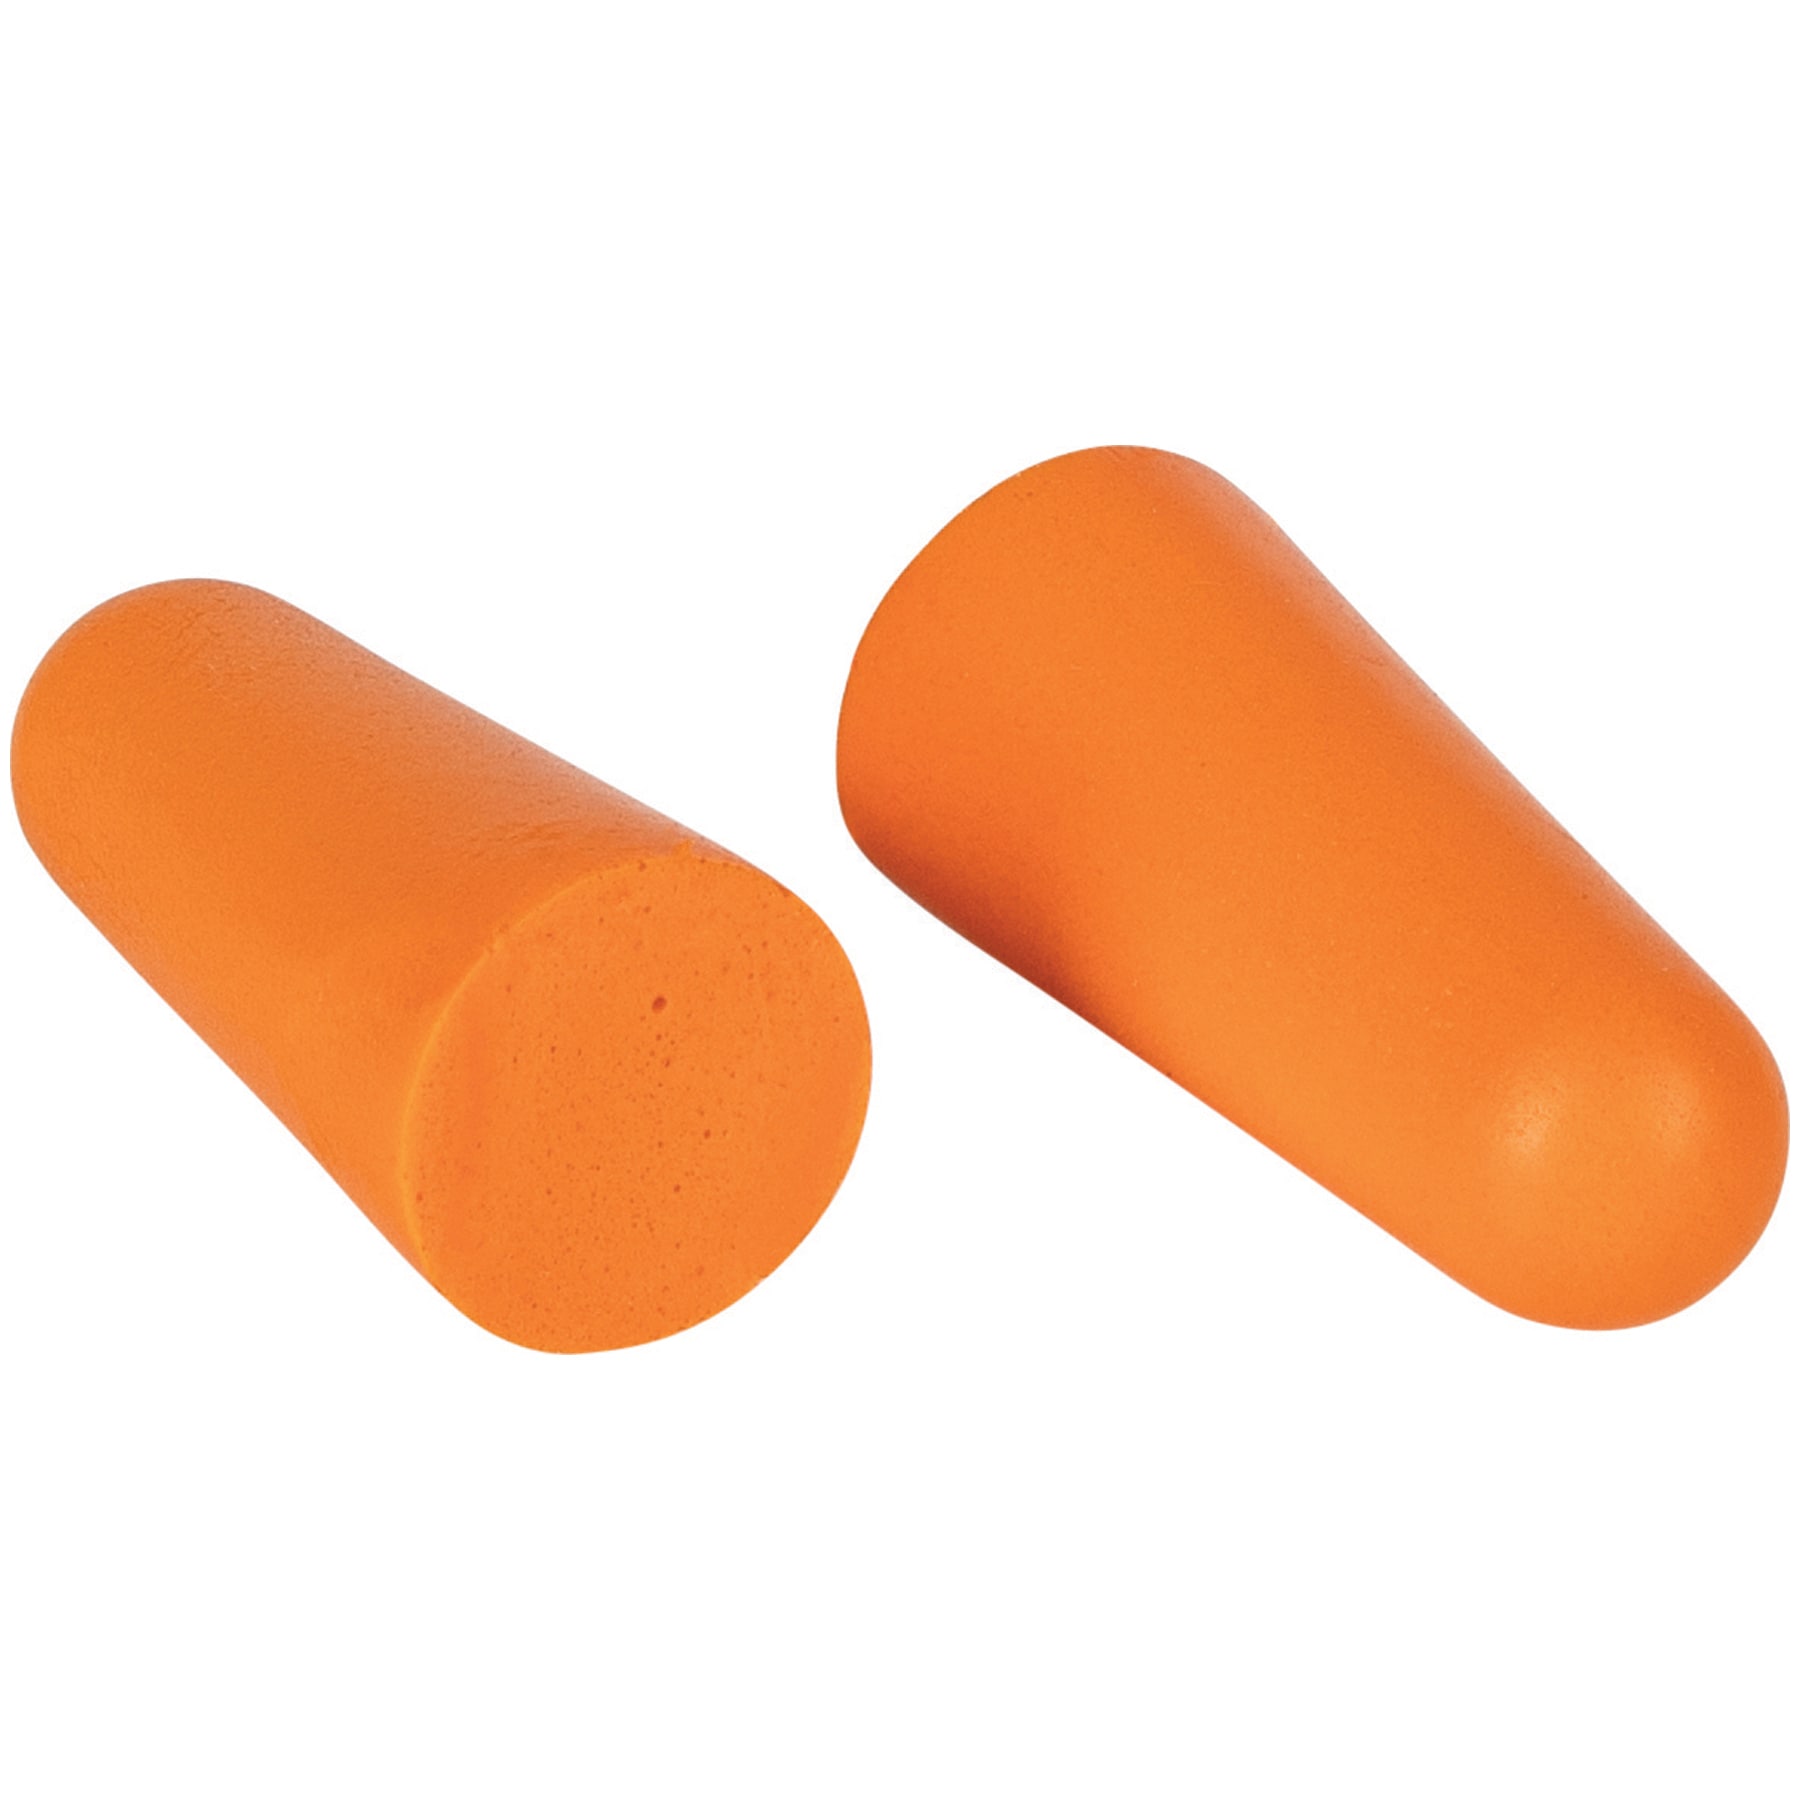 HEAROS 80-Pack Hearing Protection Earplugs in the Hearing Protection  department at